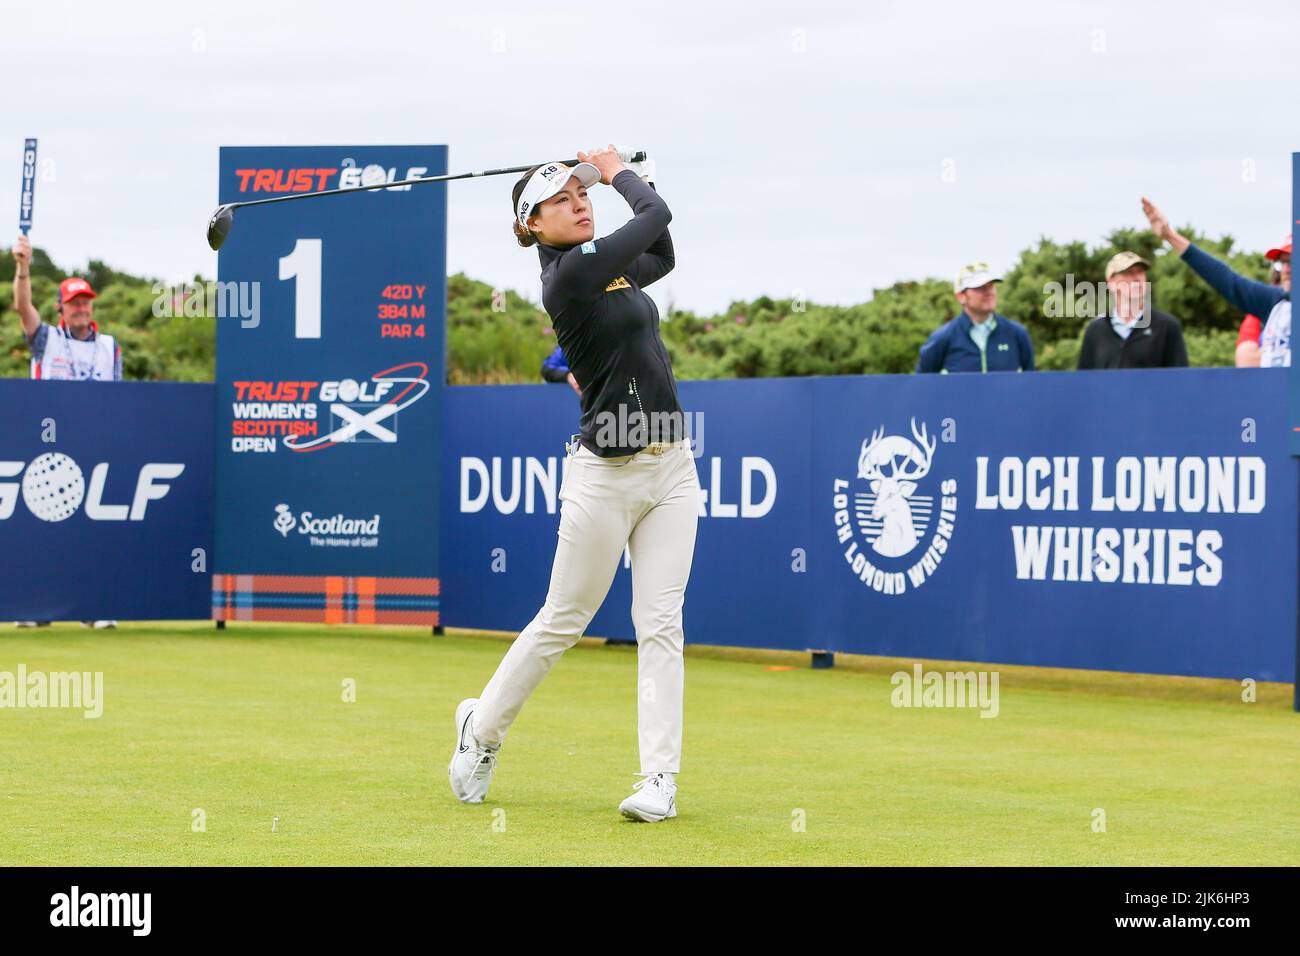 Irvine, UK. 31st July, 2022. On the final day of the Trust Golf Women's Scottish Golf at Dundonald Links Golf Course, Irvine, Ayrshire, UK, the top 12 players are separated by only 4 strokes. The players are playing for a total purse of $2,000,000 and the prestigious trophy. In gee chun on the first tee. Credit: Findlay/Alamy Live News Stock Photo